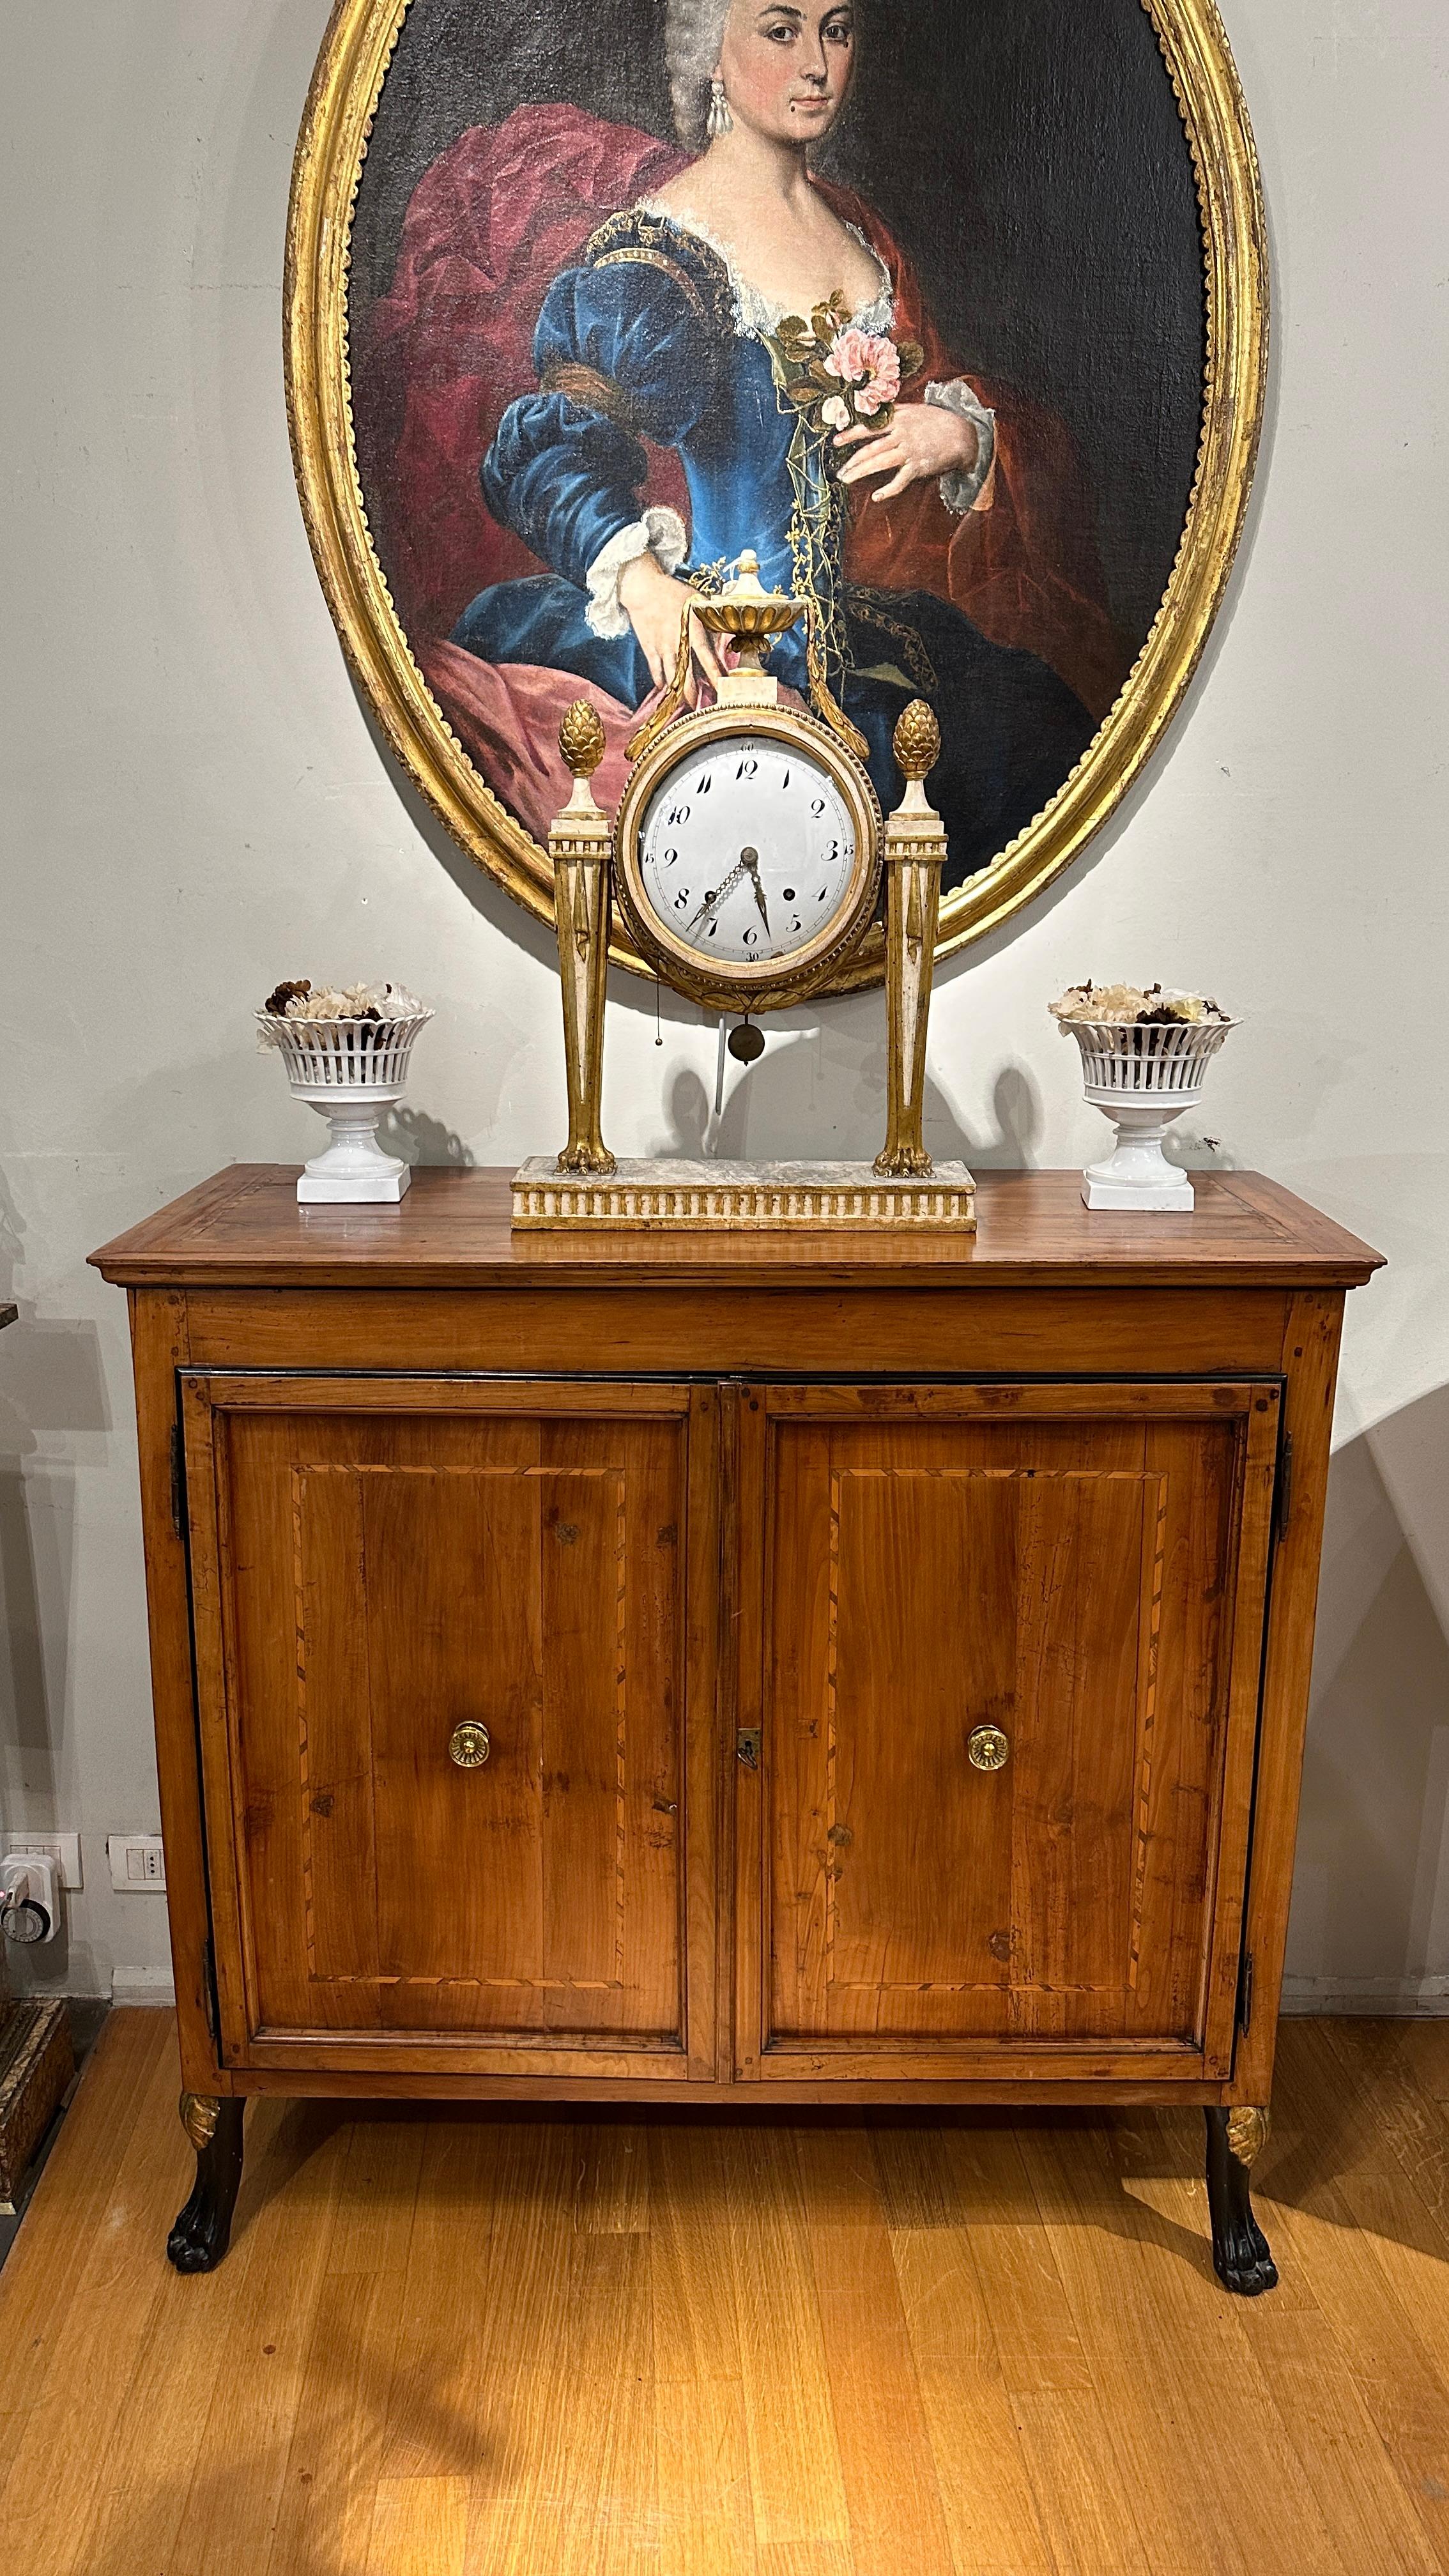 Italian EARLY 19th CENTURY LUCHESE EMPIRE SIDEBOARD For Sale